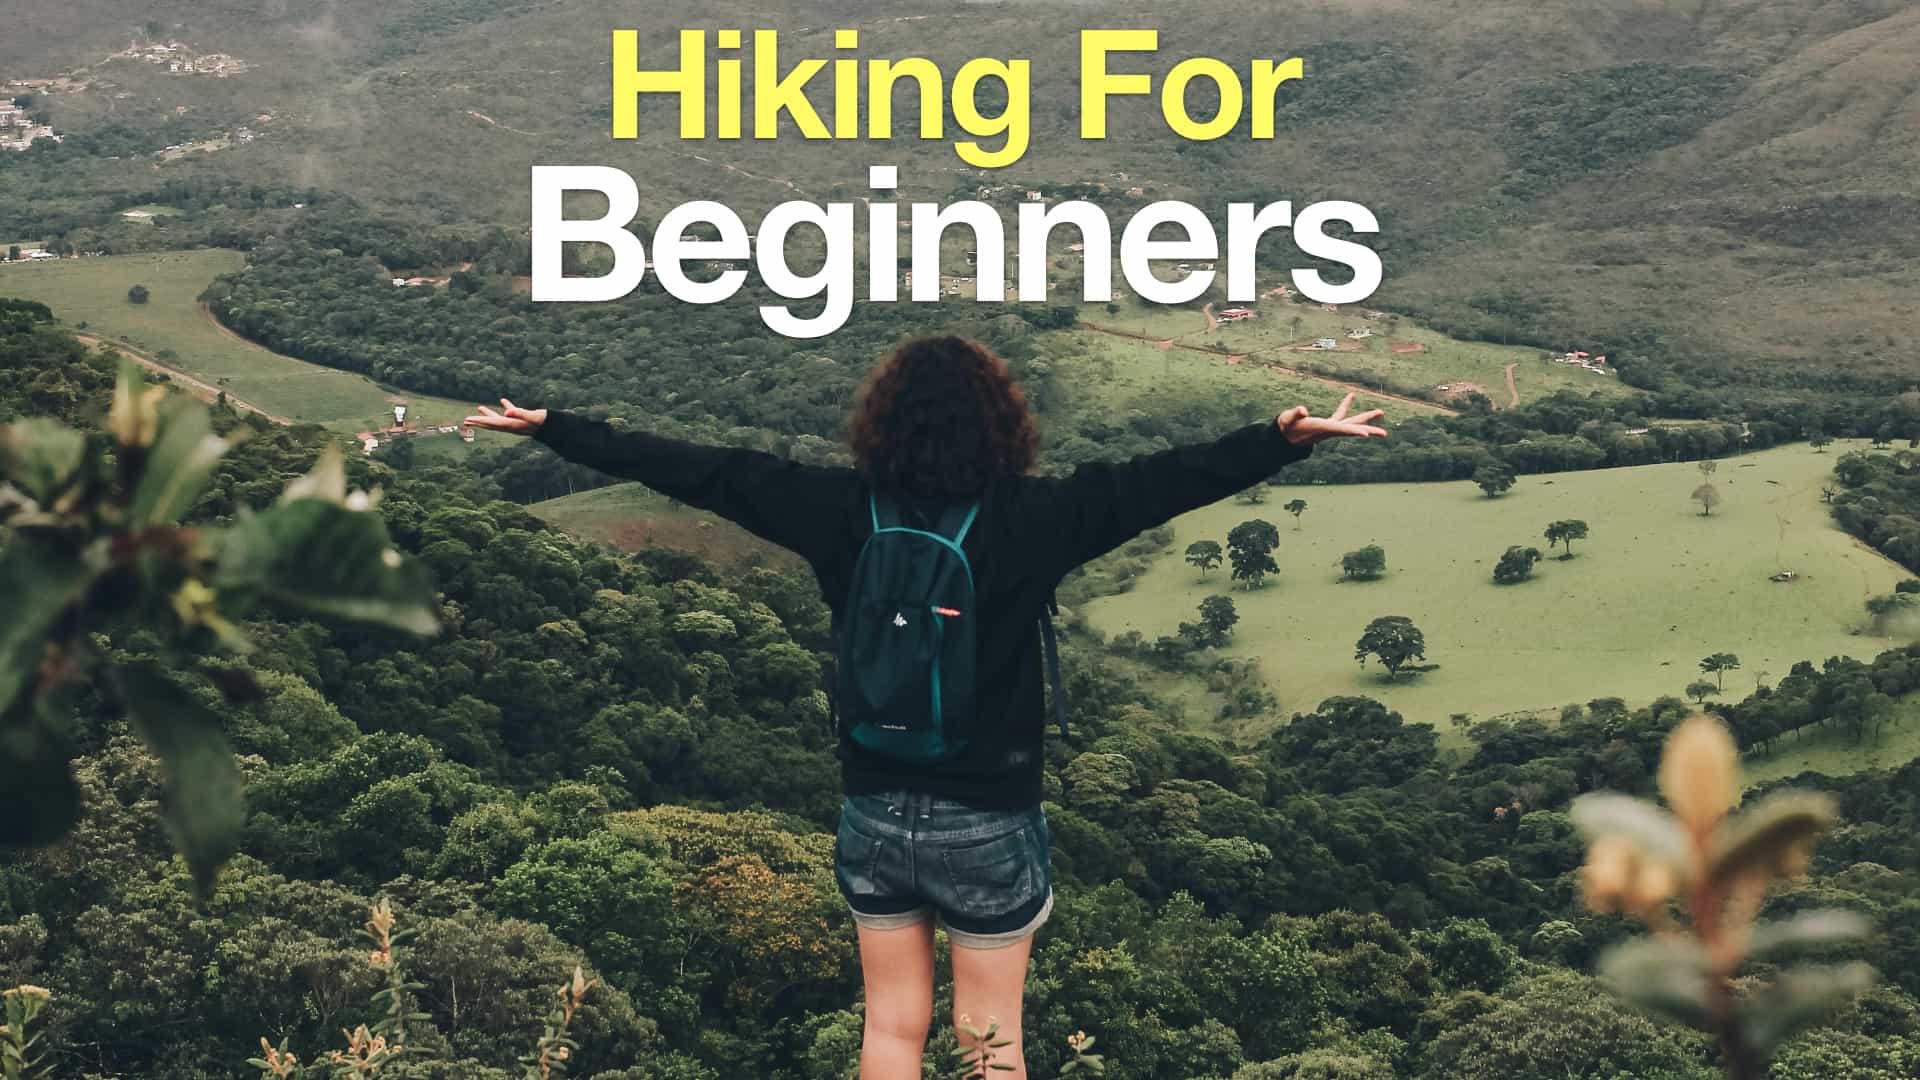 How to Tackle The Mission Peak Hike